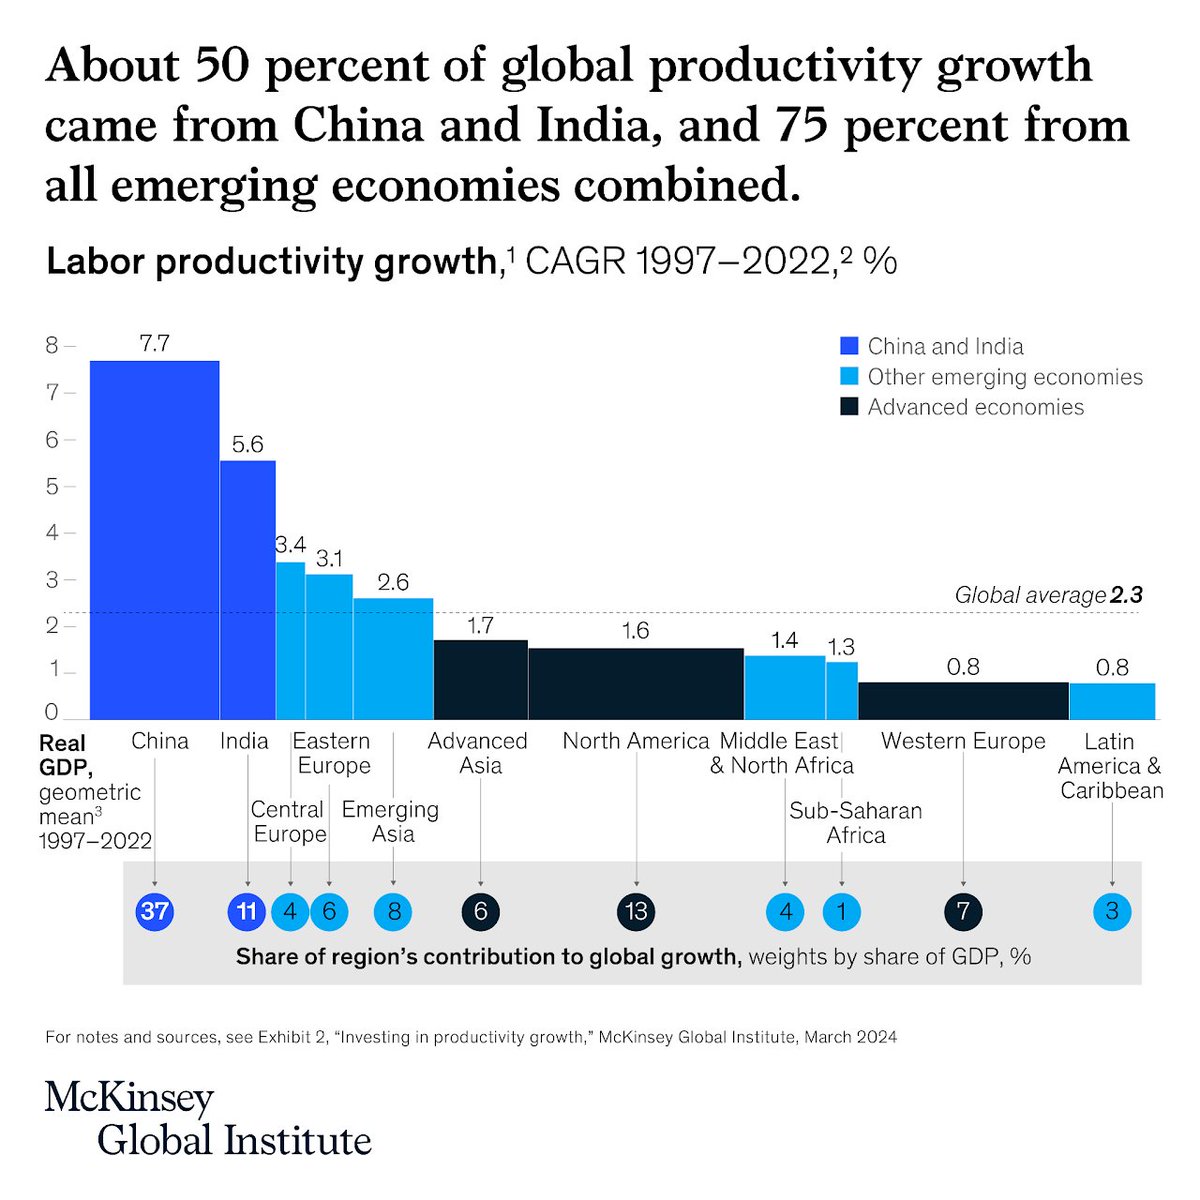 The past 25 years have been a success story for global productivity—with China and India accounting for nearly half of aggregate global productivity growth. But many economies experienced productivity stagnation. Get the global picture in our research 👉 mck.co/productivity20…